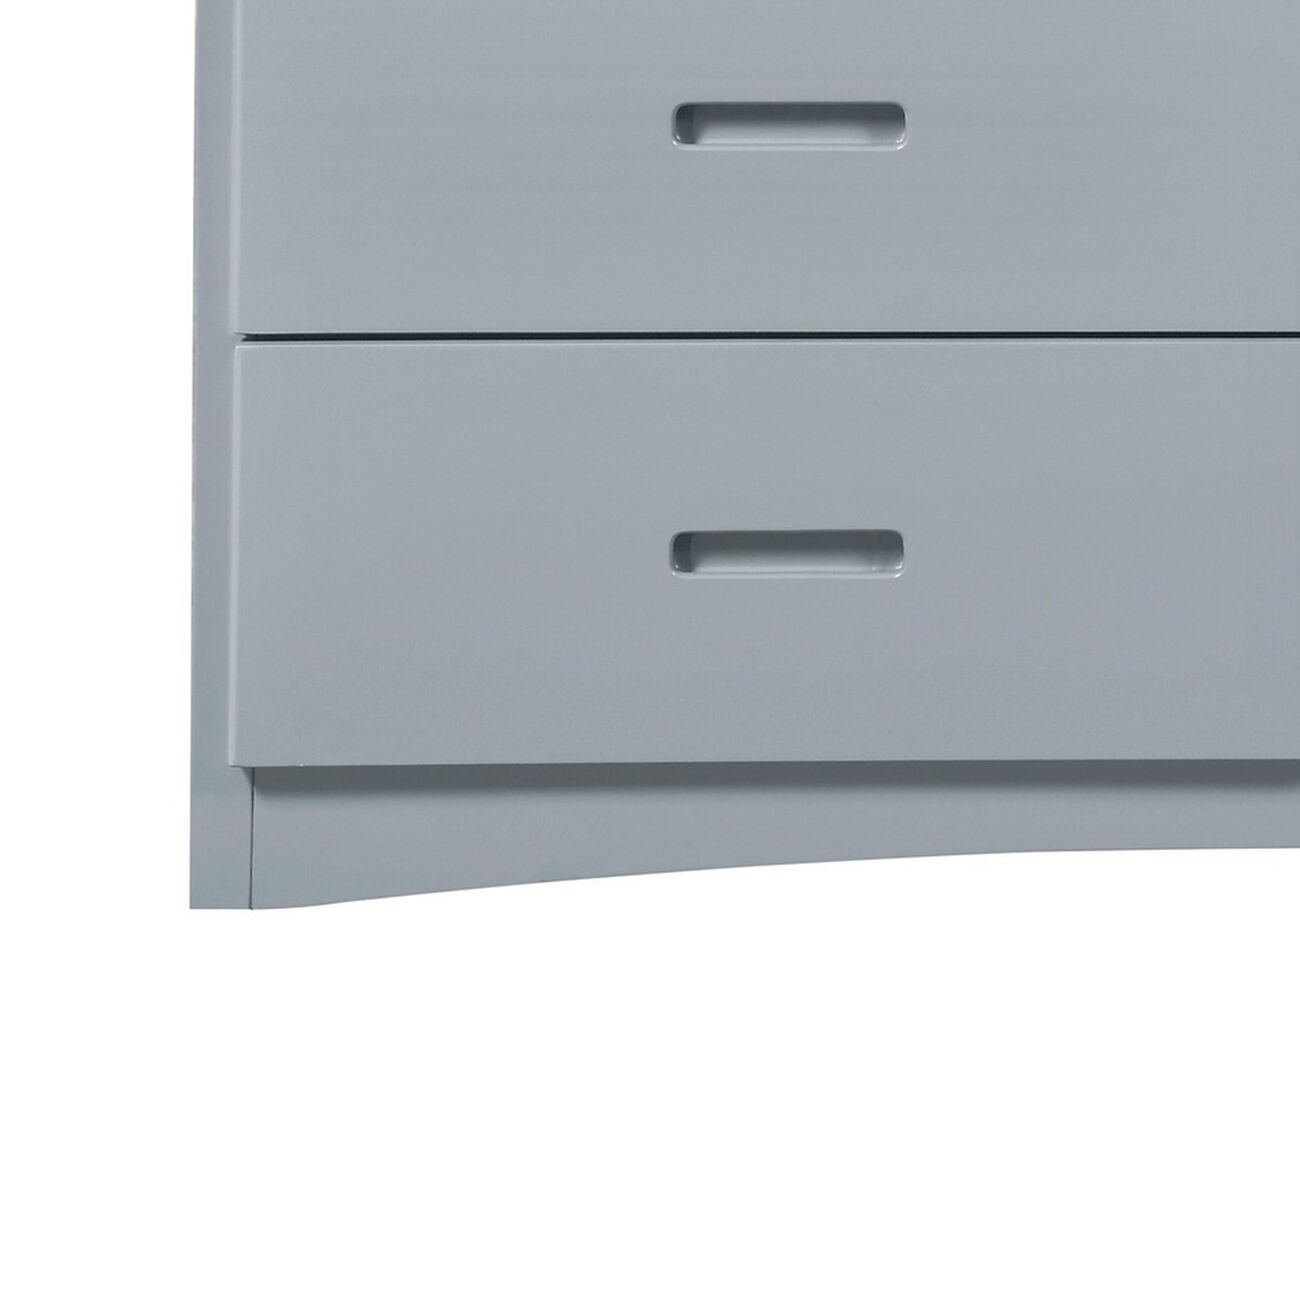 Transitional Wooden Dresser with 6 Drawers and Recessed Handles, Gray